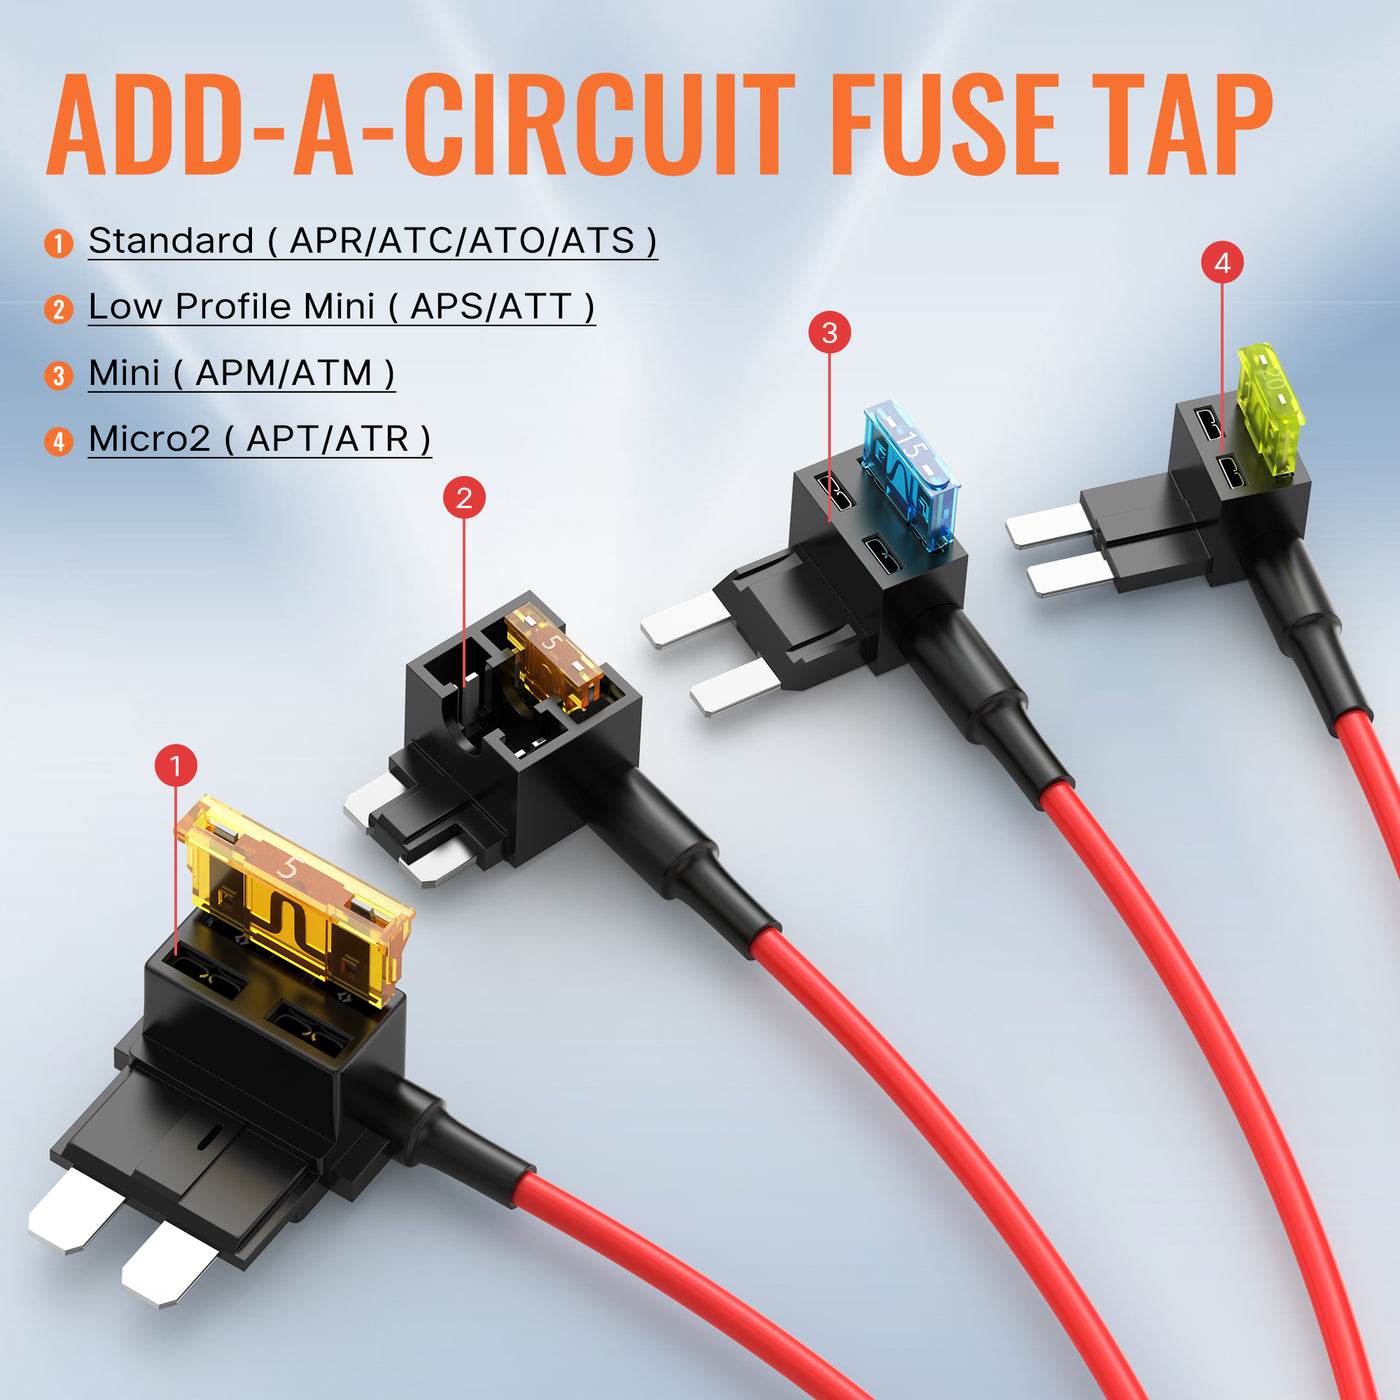 QSABC Add-a-Circuit Fuse Tap Adapter Kit with Fuse